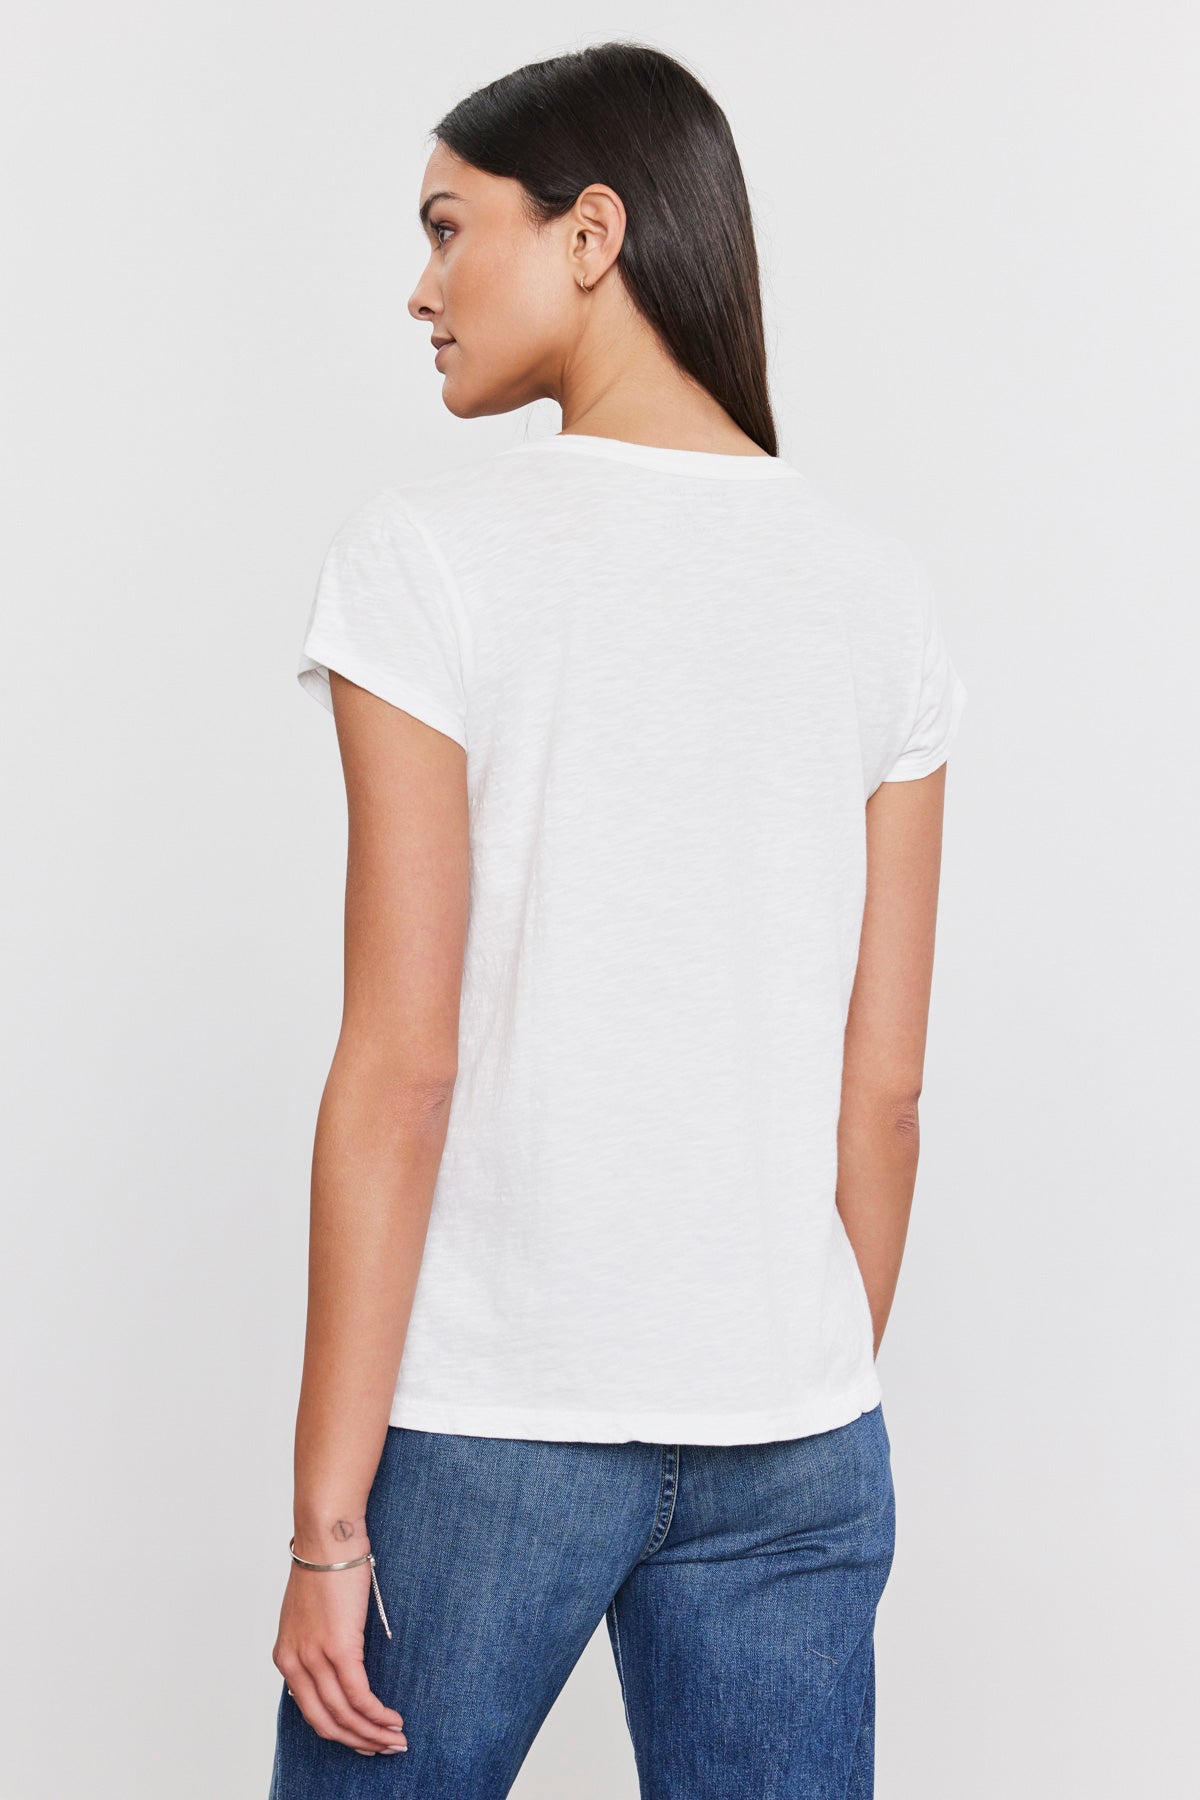 The back view of a woman wearing a white Velvet by Graham & Spencer KIRA ORIGINAL SLUB SCOOP NECK TEE and jeans.-35586106032321